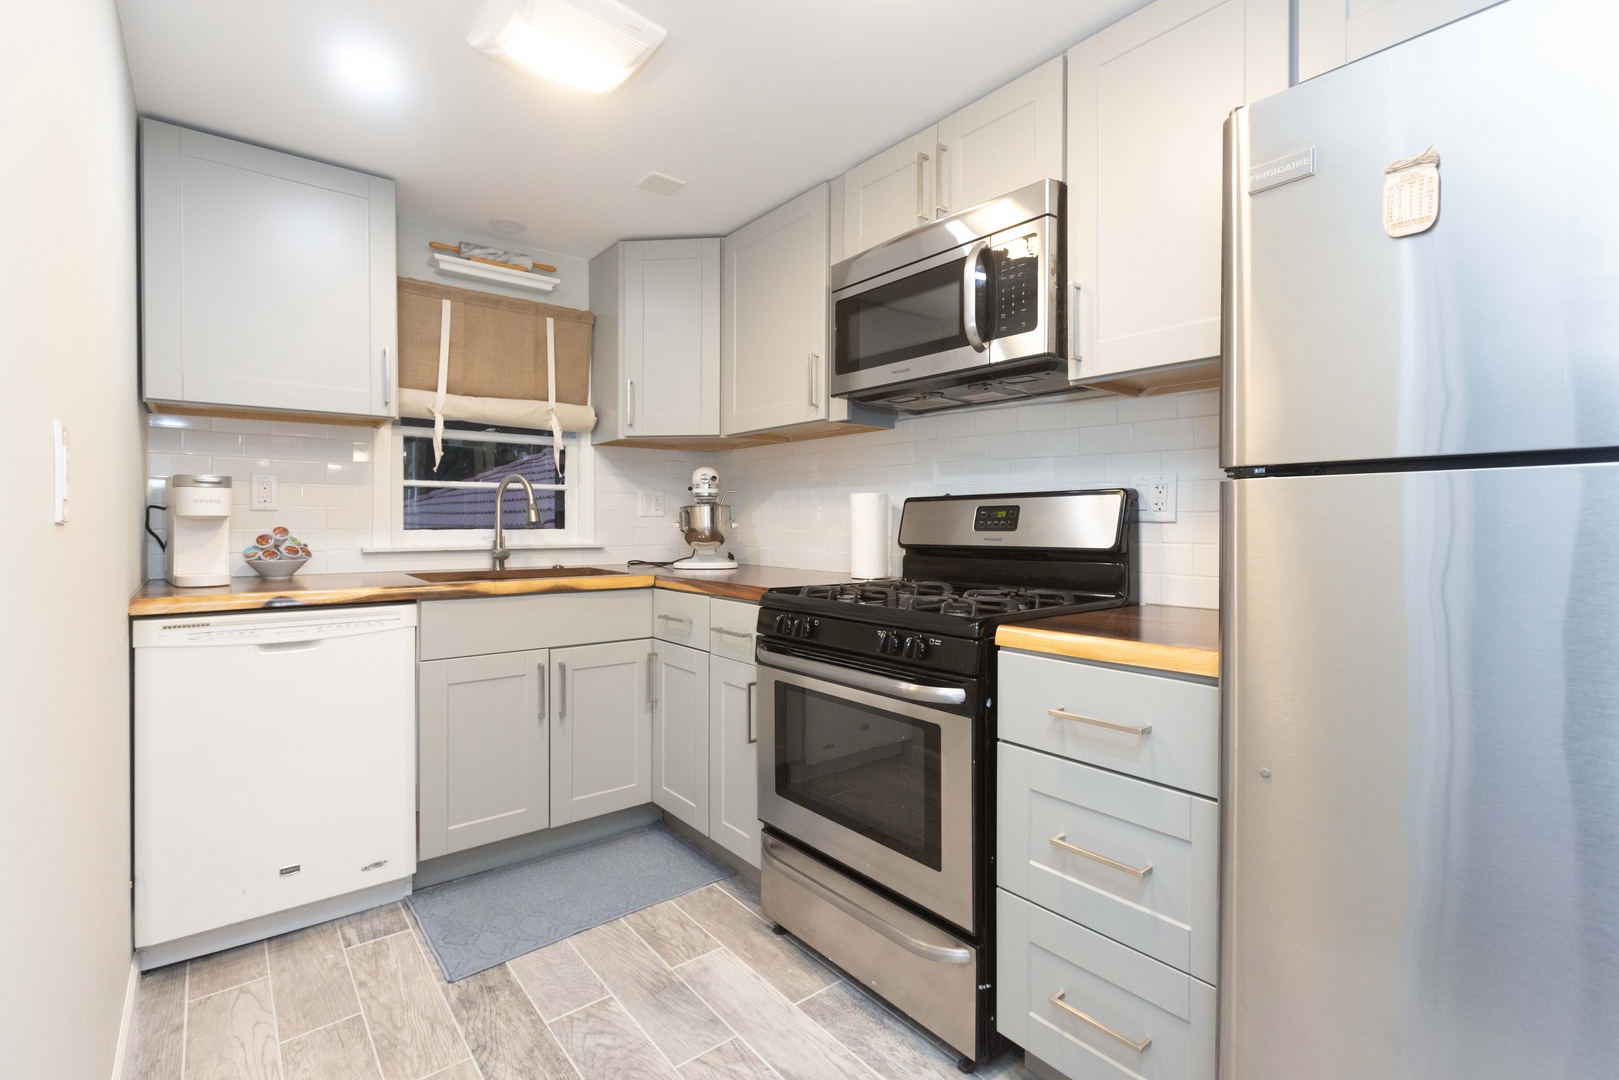 The kitchen offers ample cabinet space & all the comforts of home